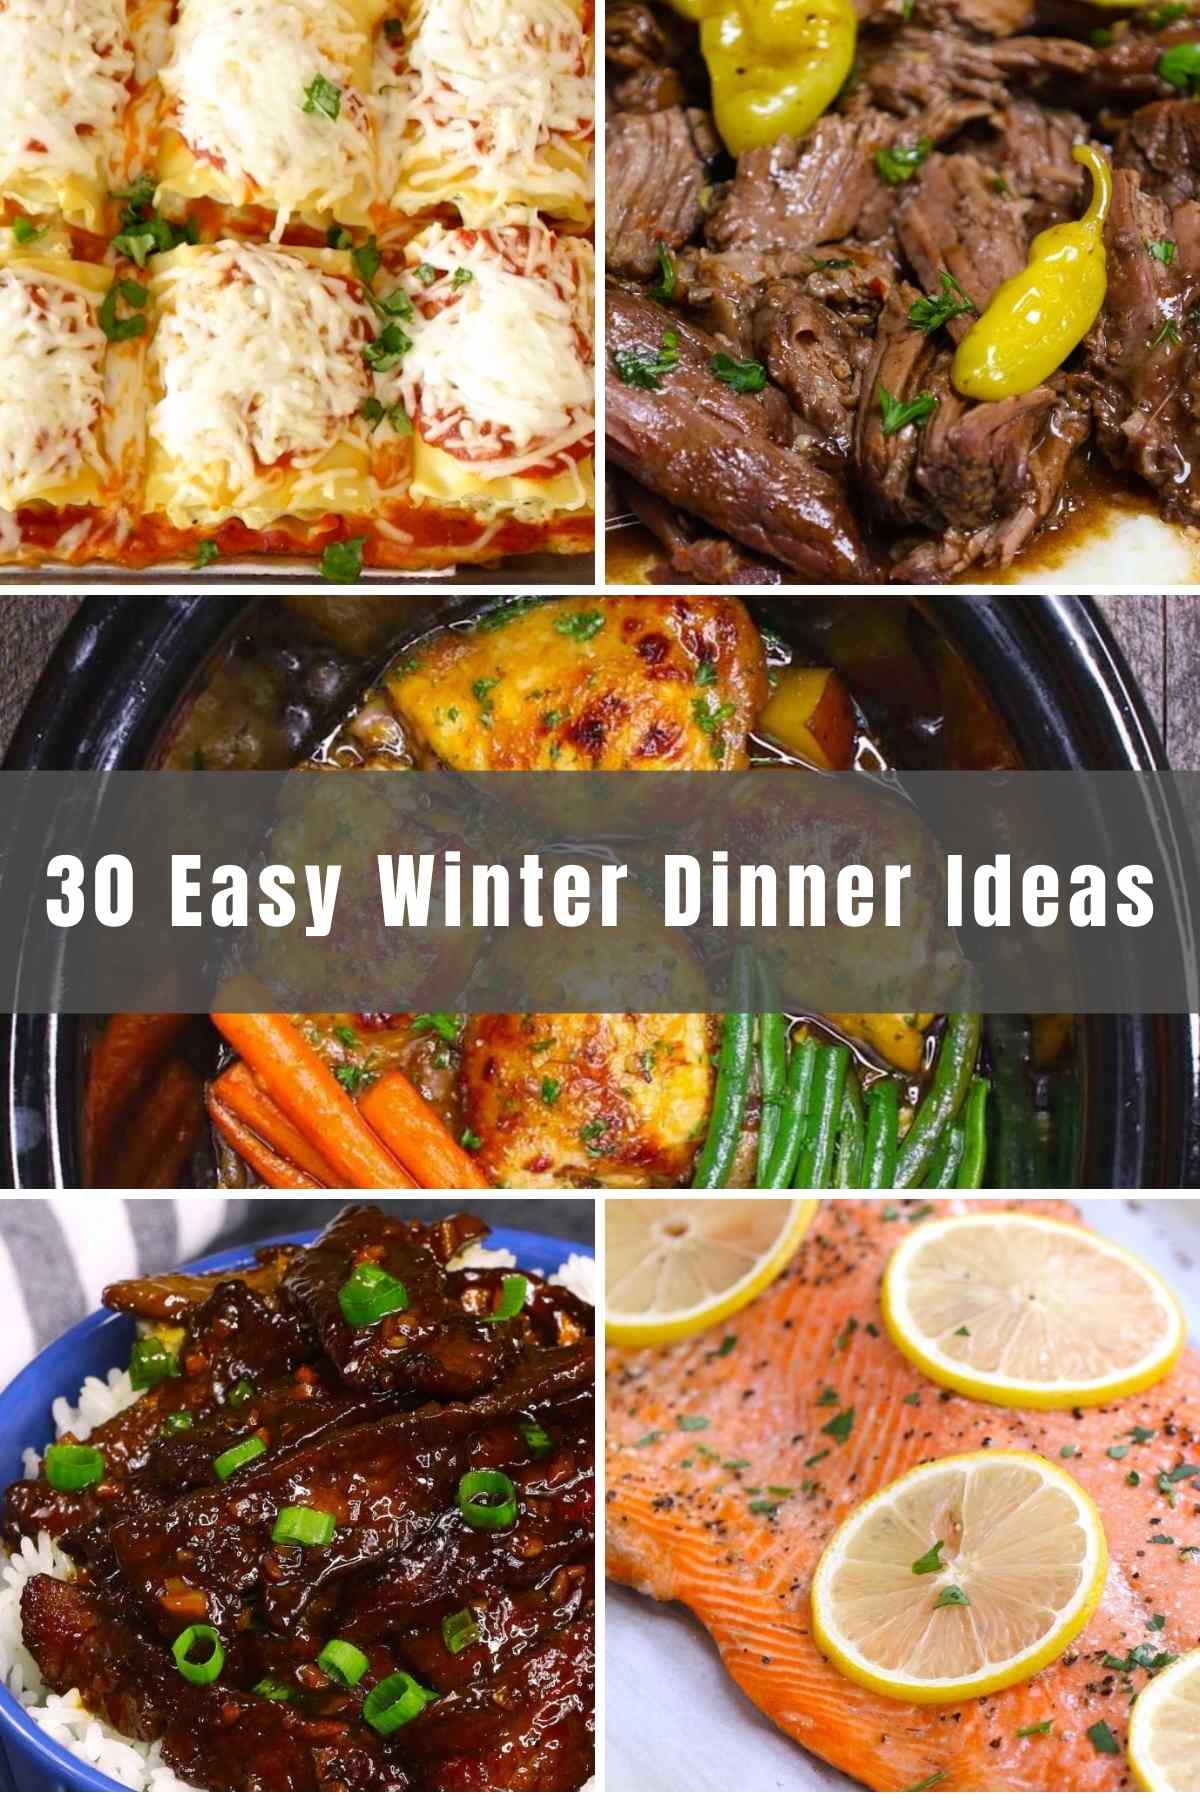 Just because it’s winter, doesn’t mean you can’t get creative in the kitchen! We’ve pulled together 30 of our favorite Winter Dinner Ideas to warm you up for those cold nights. From pasta dishes, to fish, and hearty casseroles too, there are lots of new and classic recipes to try.